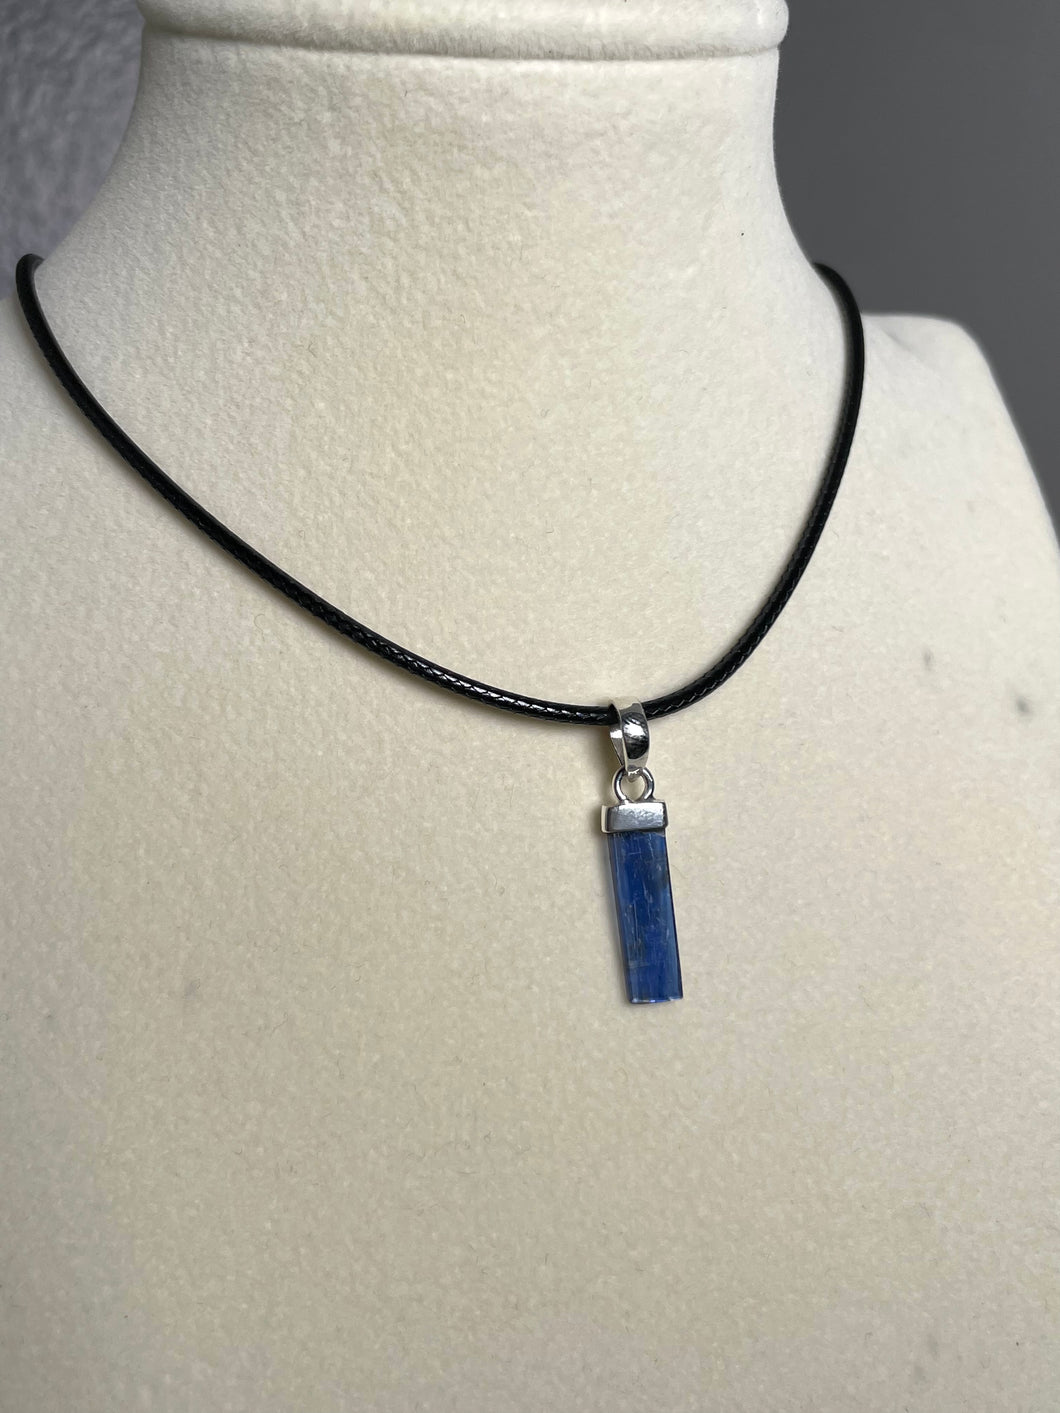 Raw Kyanite Necklace *Intuitively Selected*